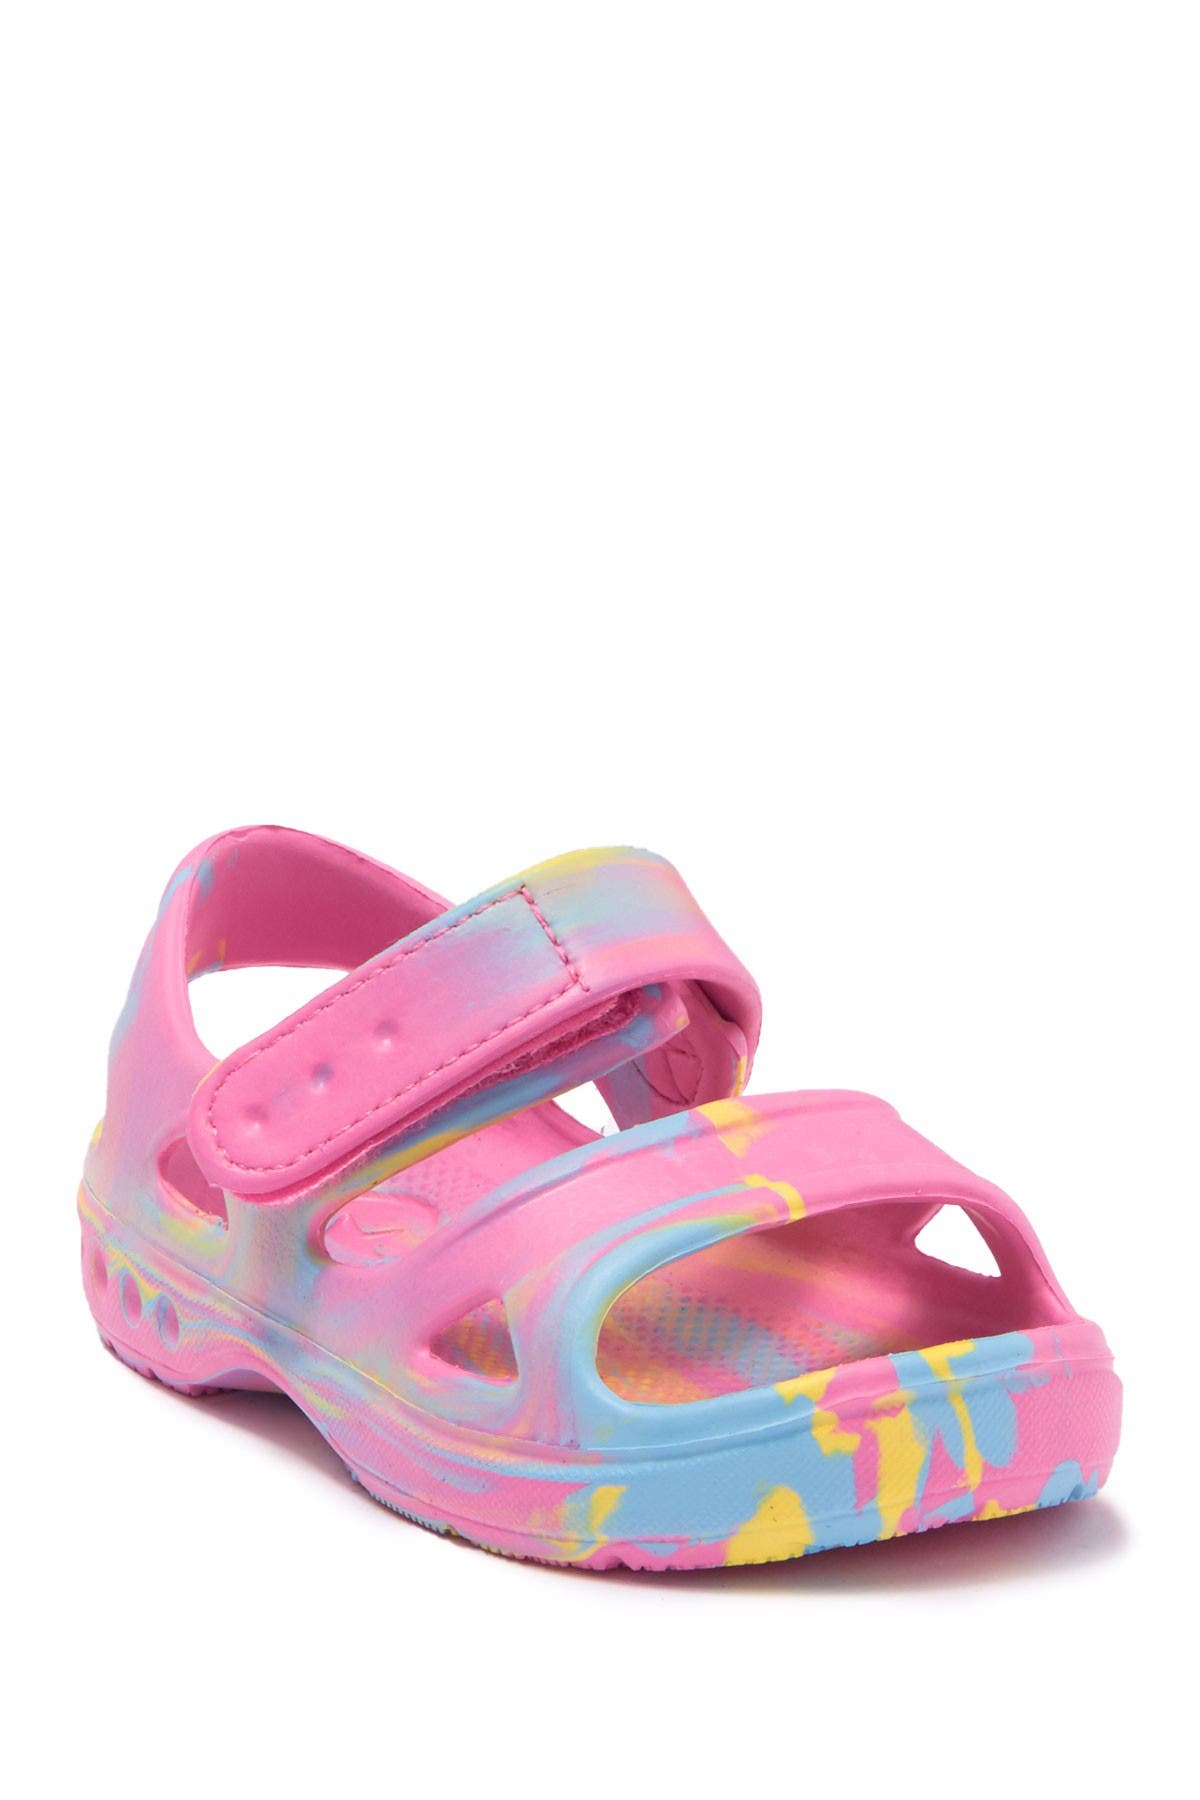 harper canyon baby girl shoes